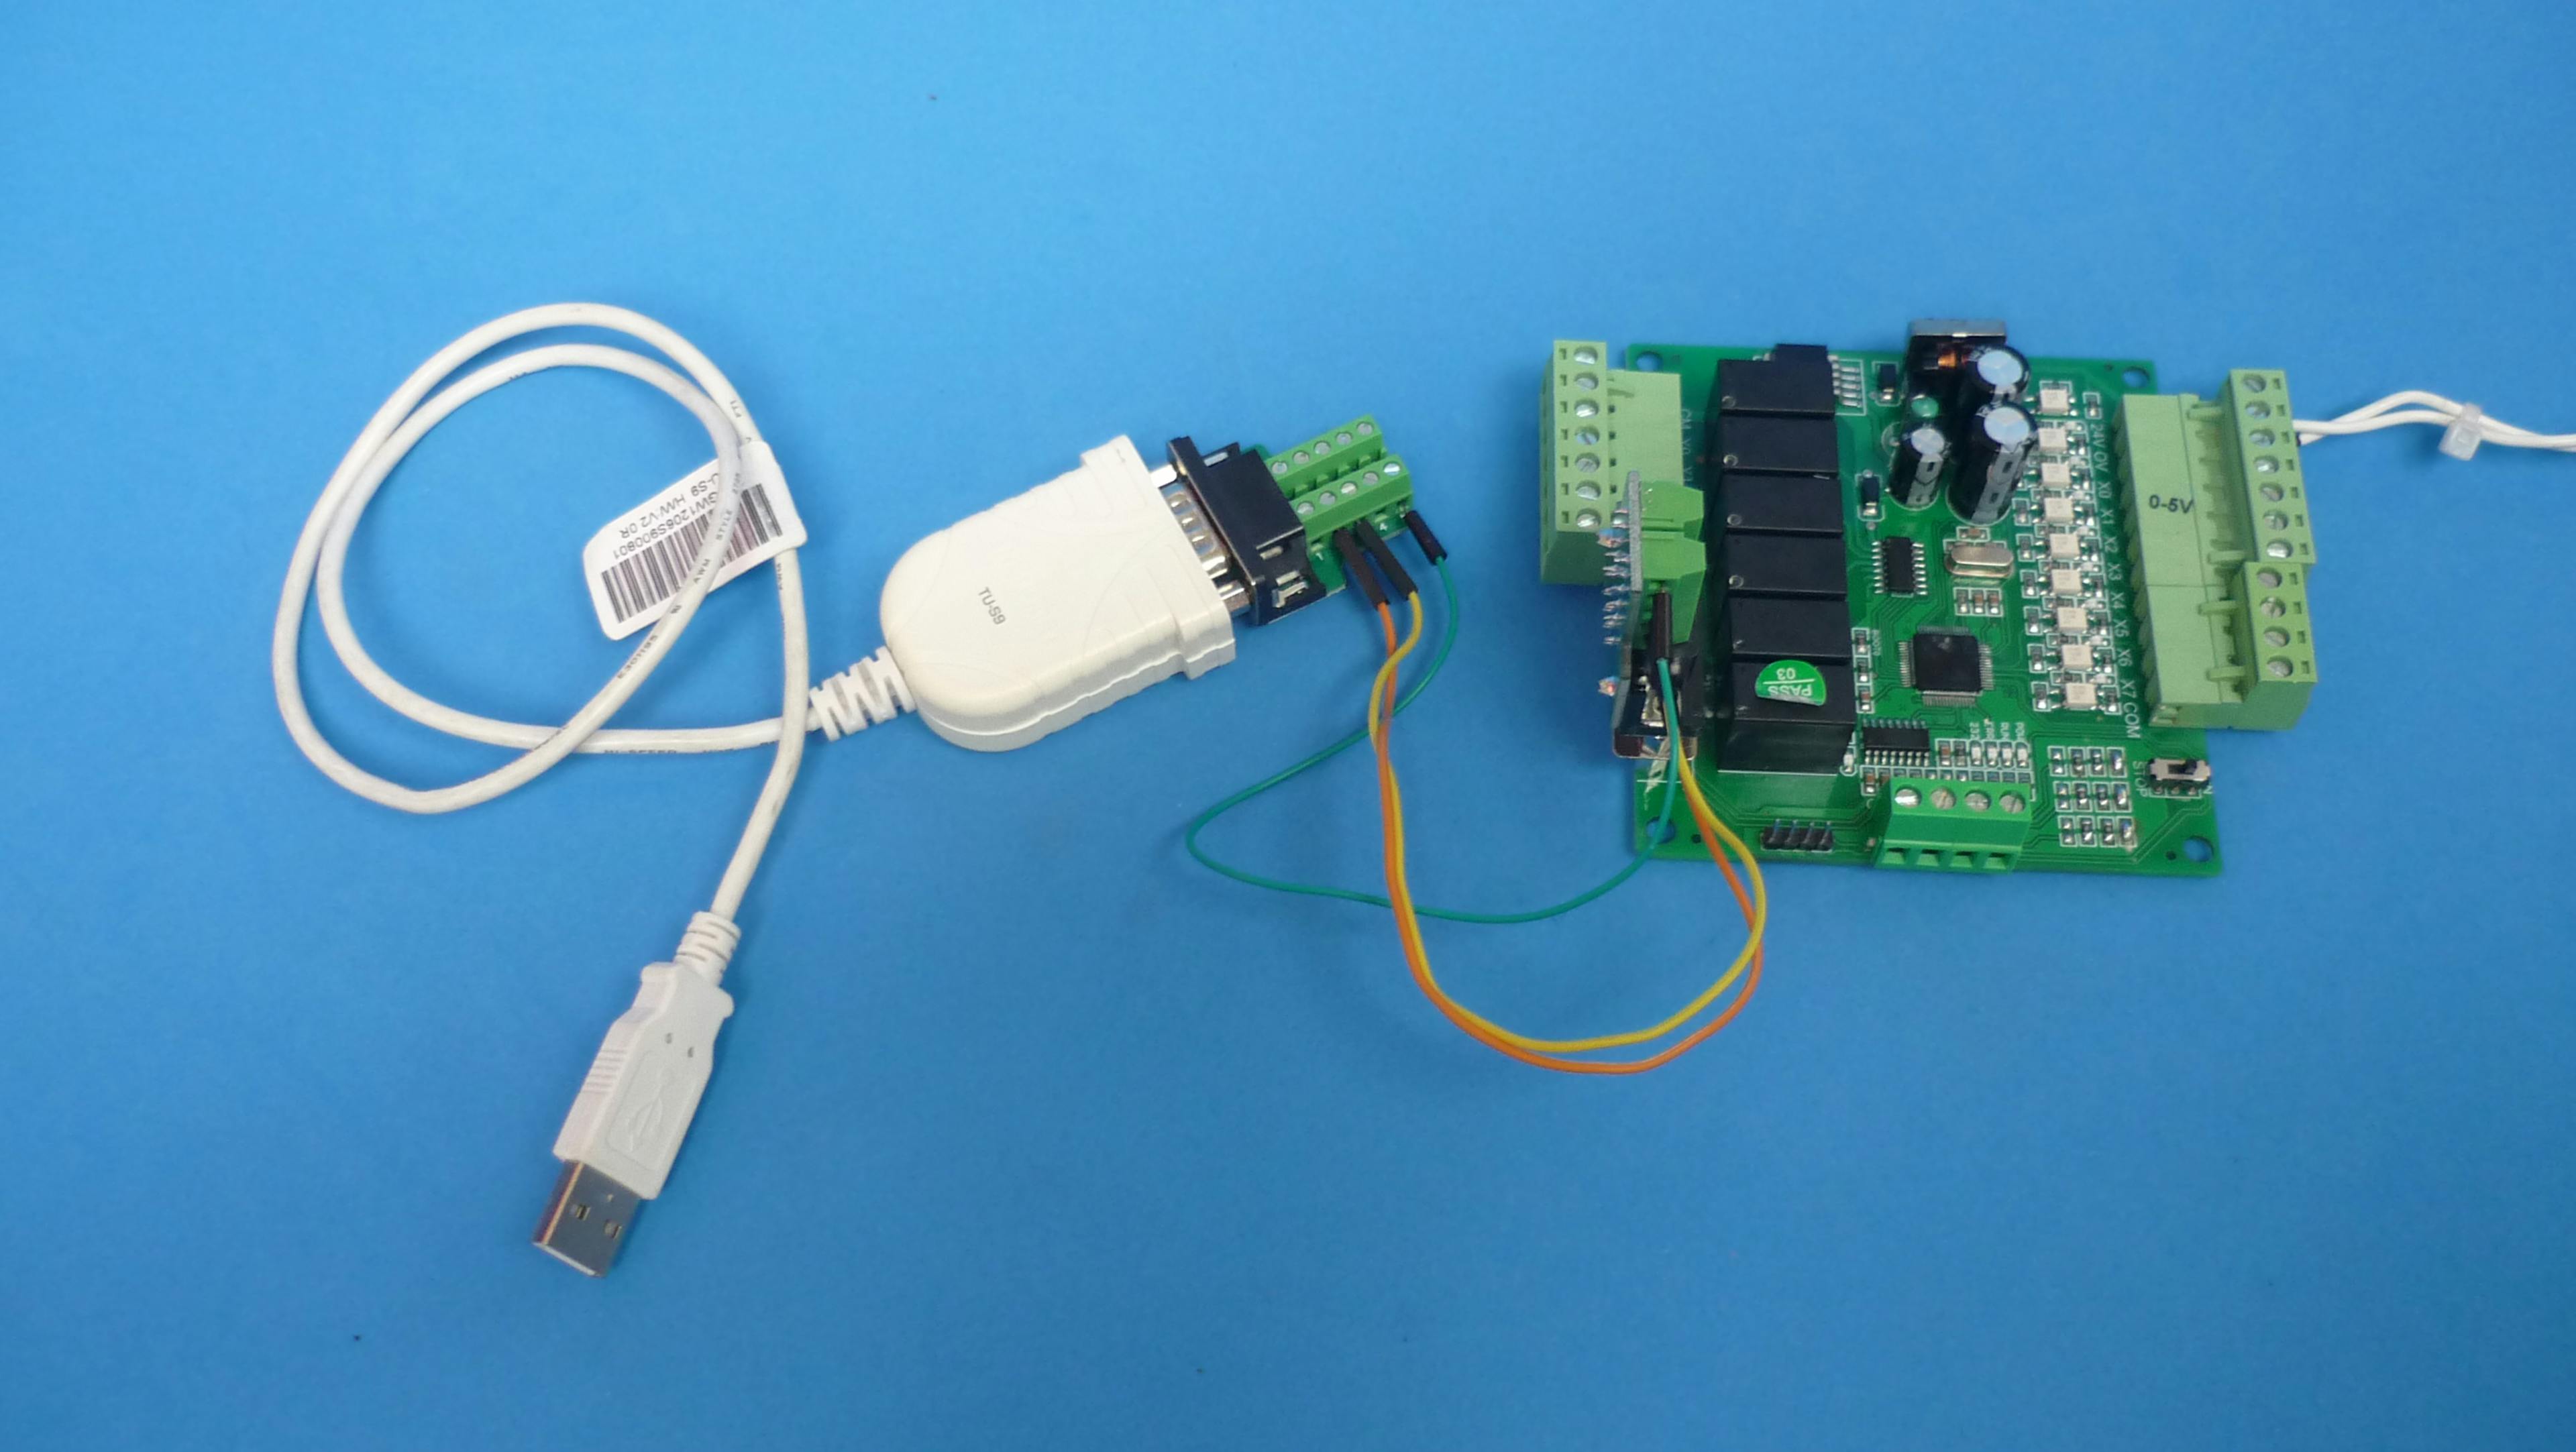 USB to RS232 converter and connectors used for communication check between PC and board